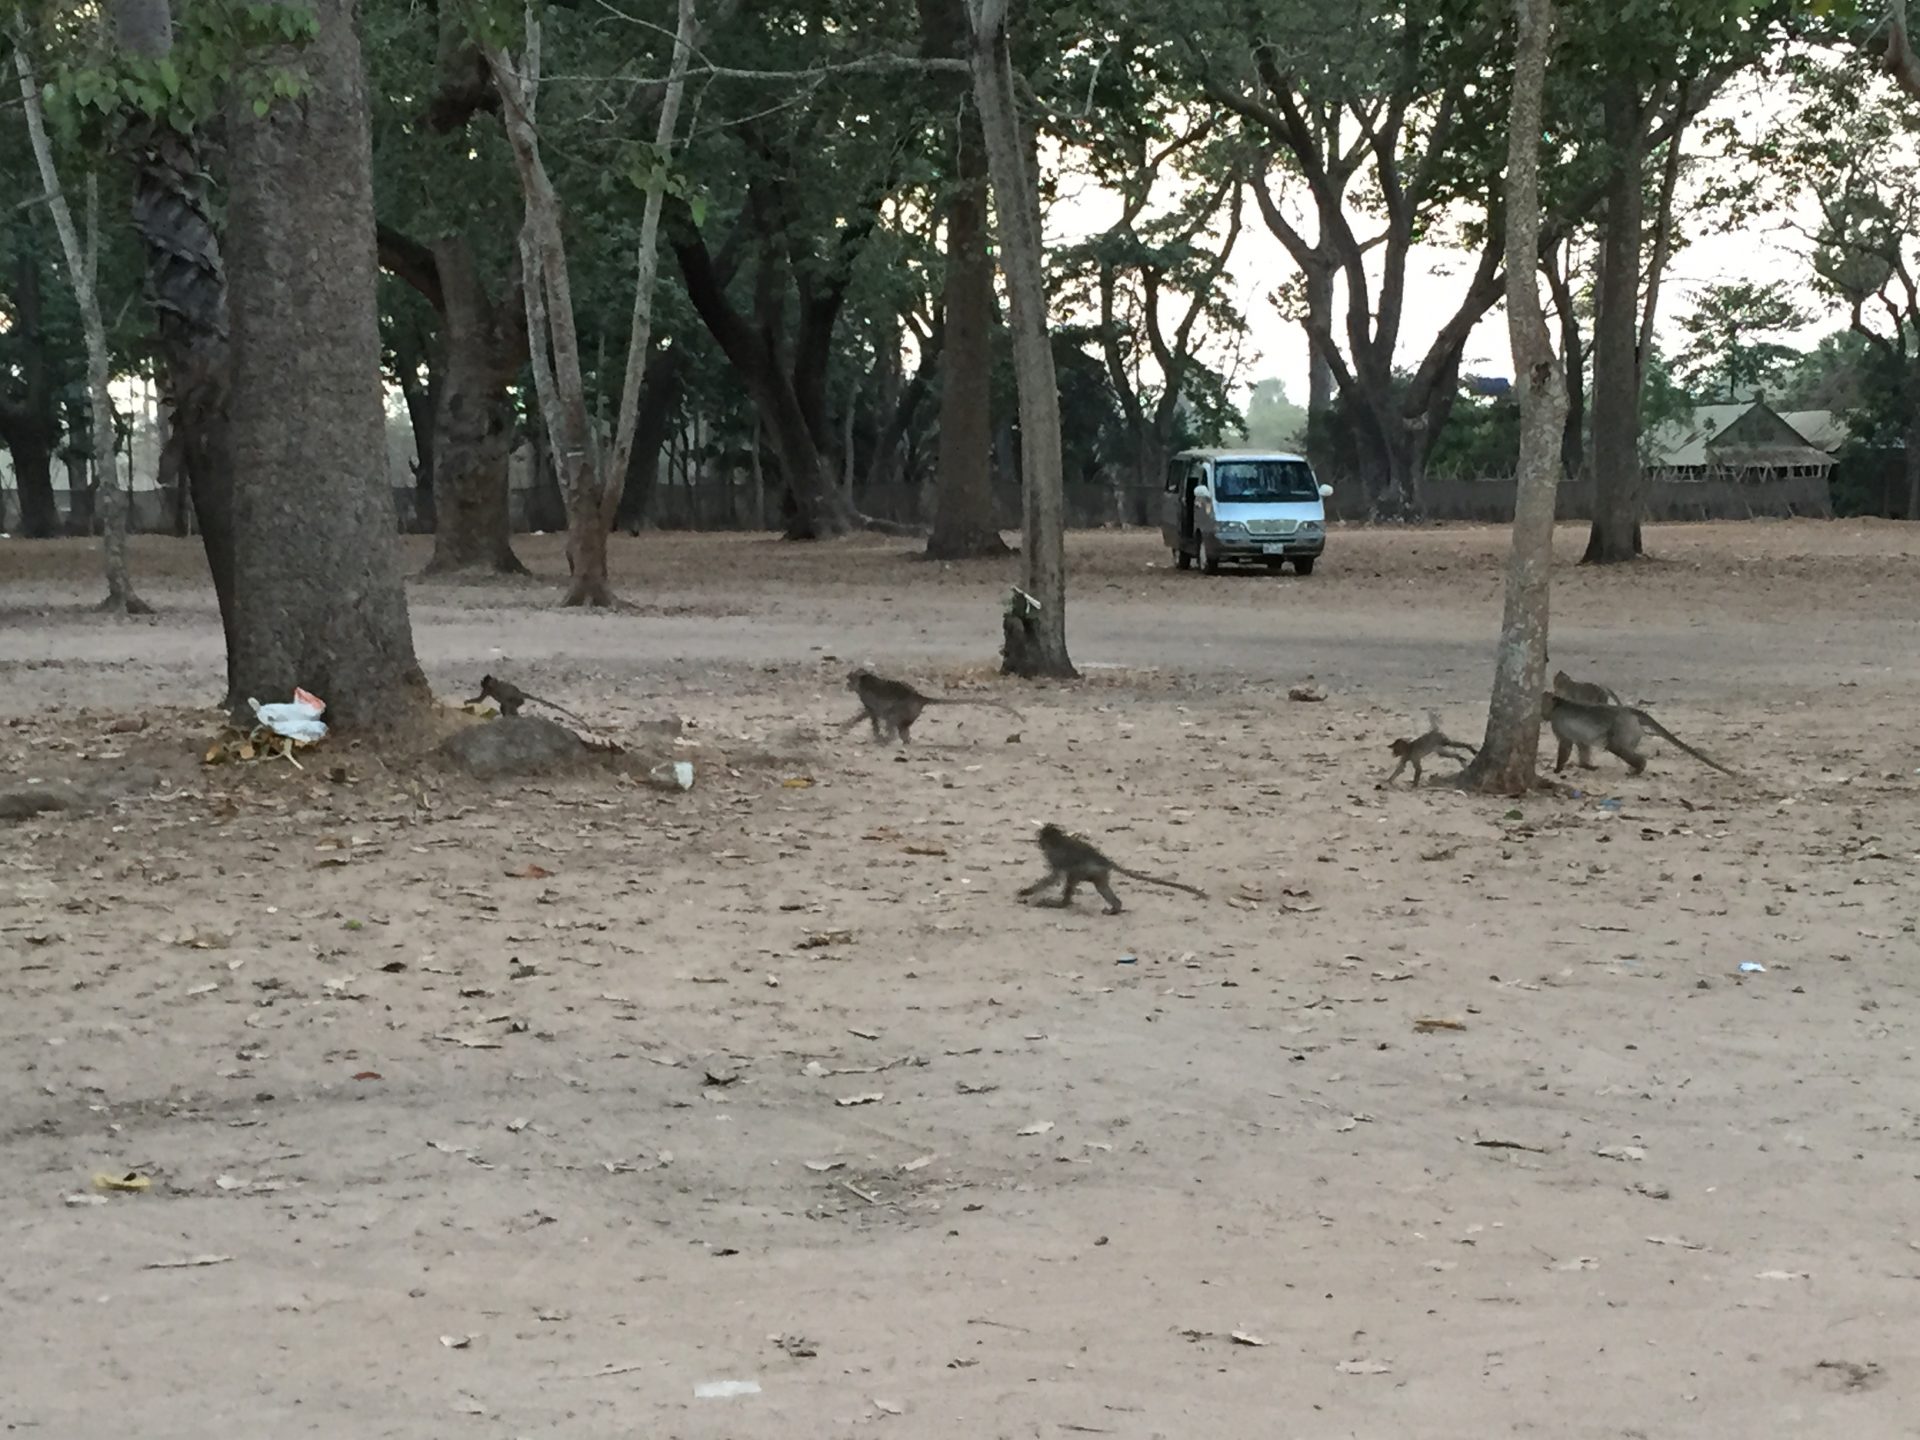 The monkeys live around the Angkor Wat temple, Siem Reap